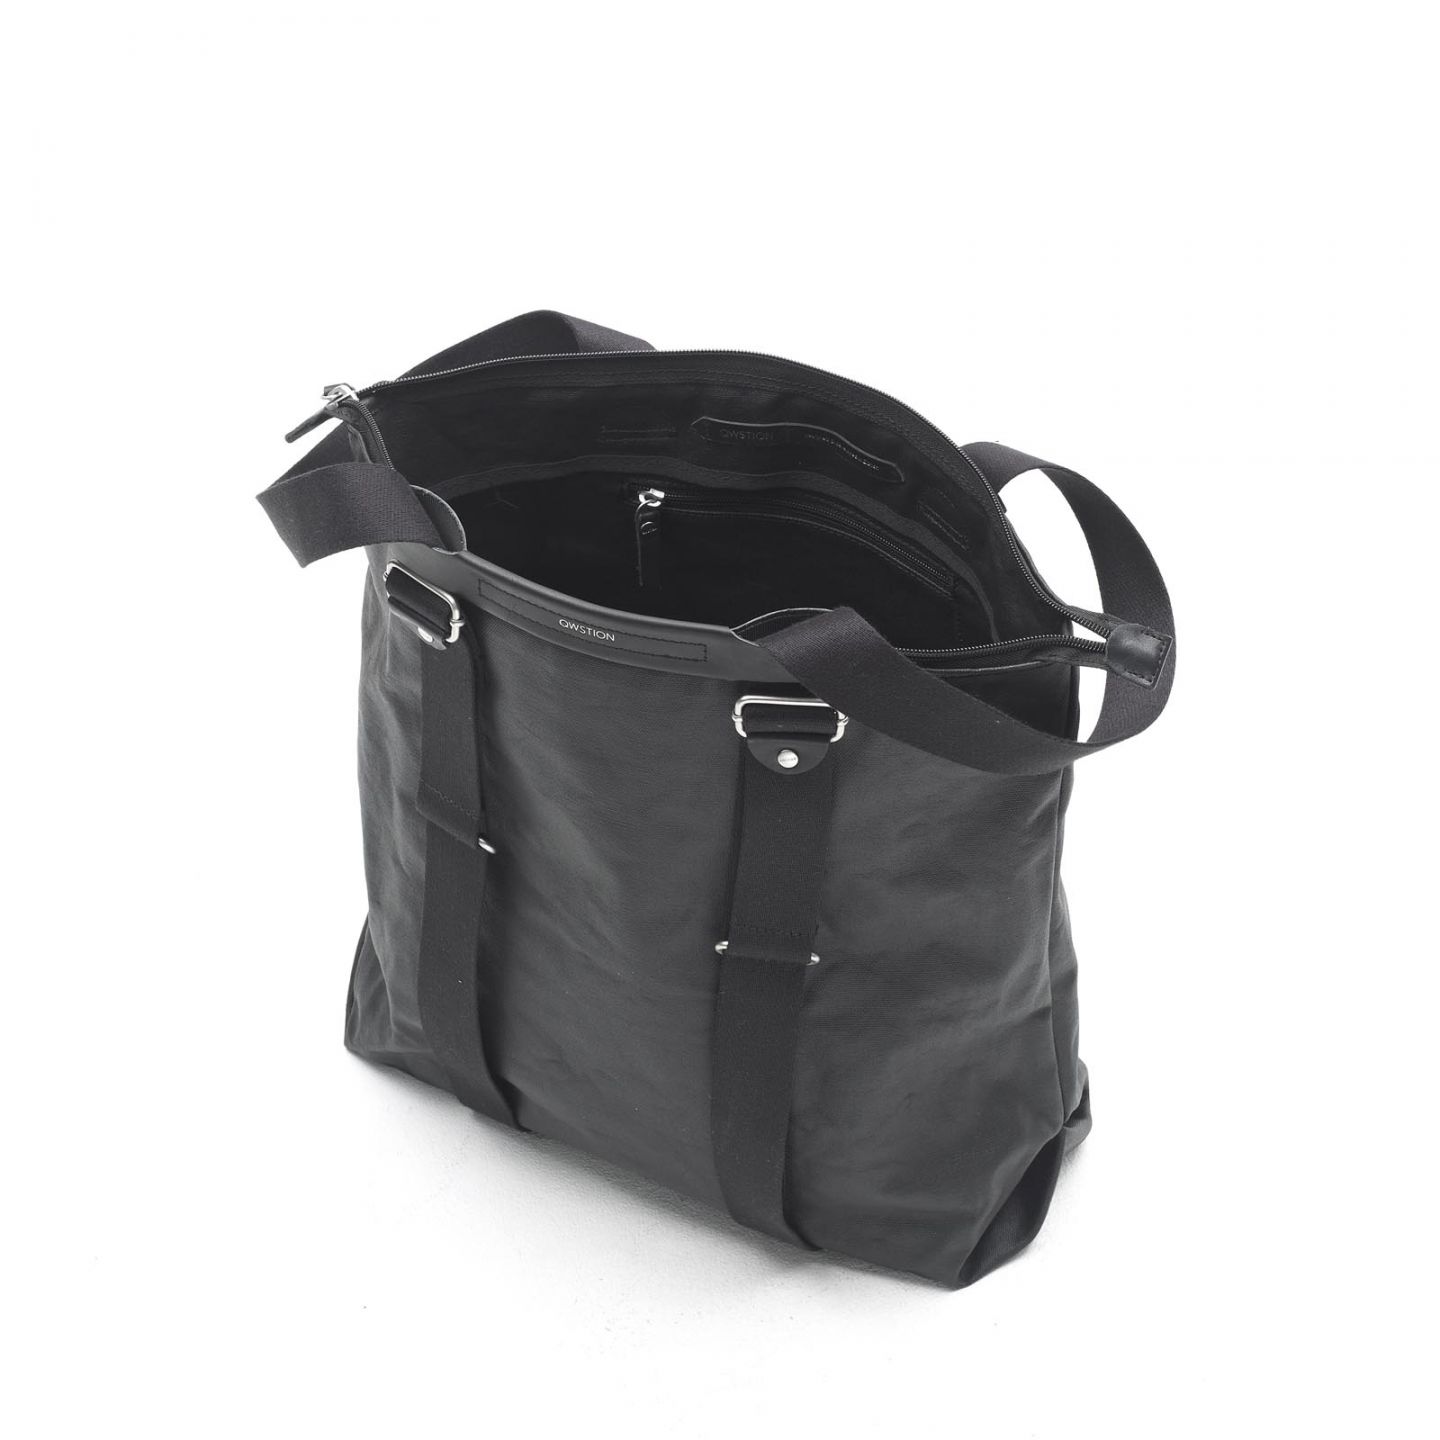 QWSTION SIMPLE ZIPSHOPPER ORGANIC JET BLACK | Qwstion shopper/backpack